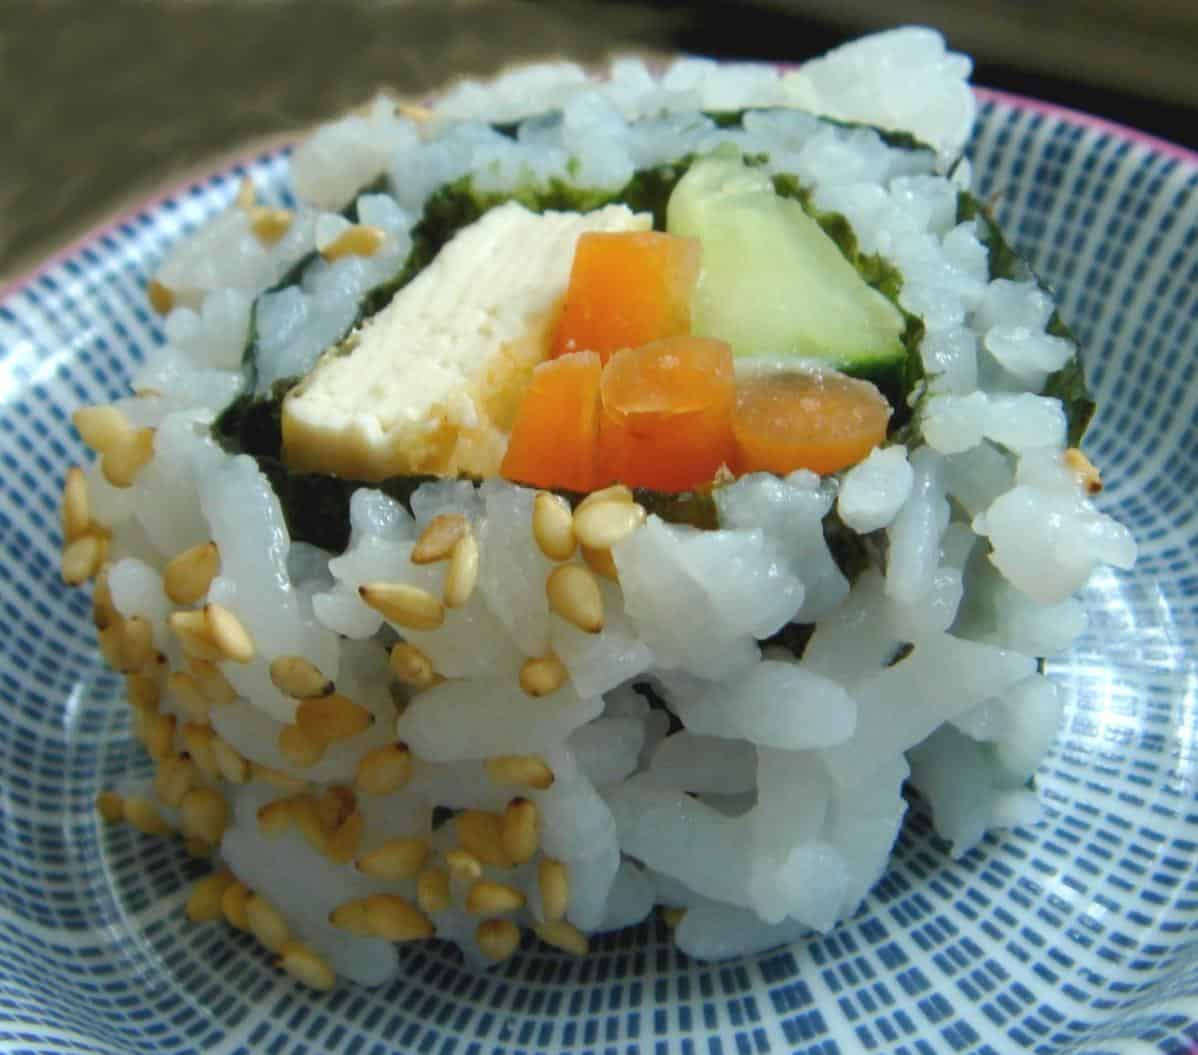  Who needs seafood when you can have these delicious veggie-packed sushi rolls?